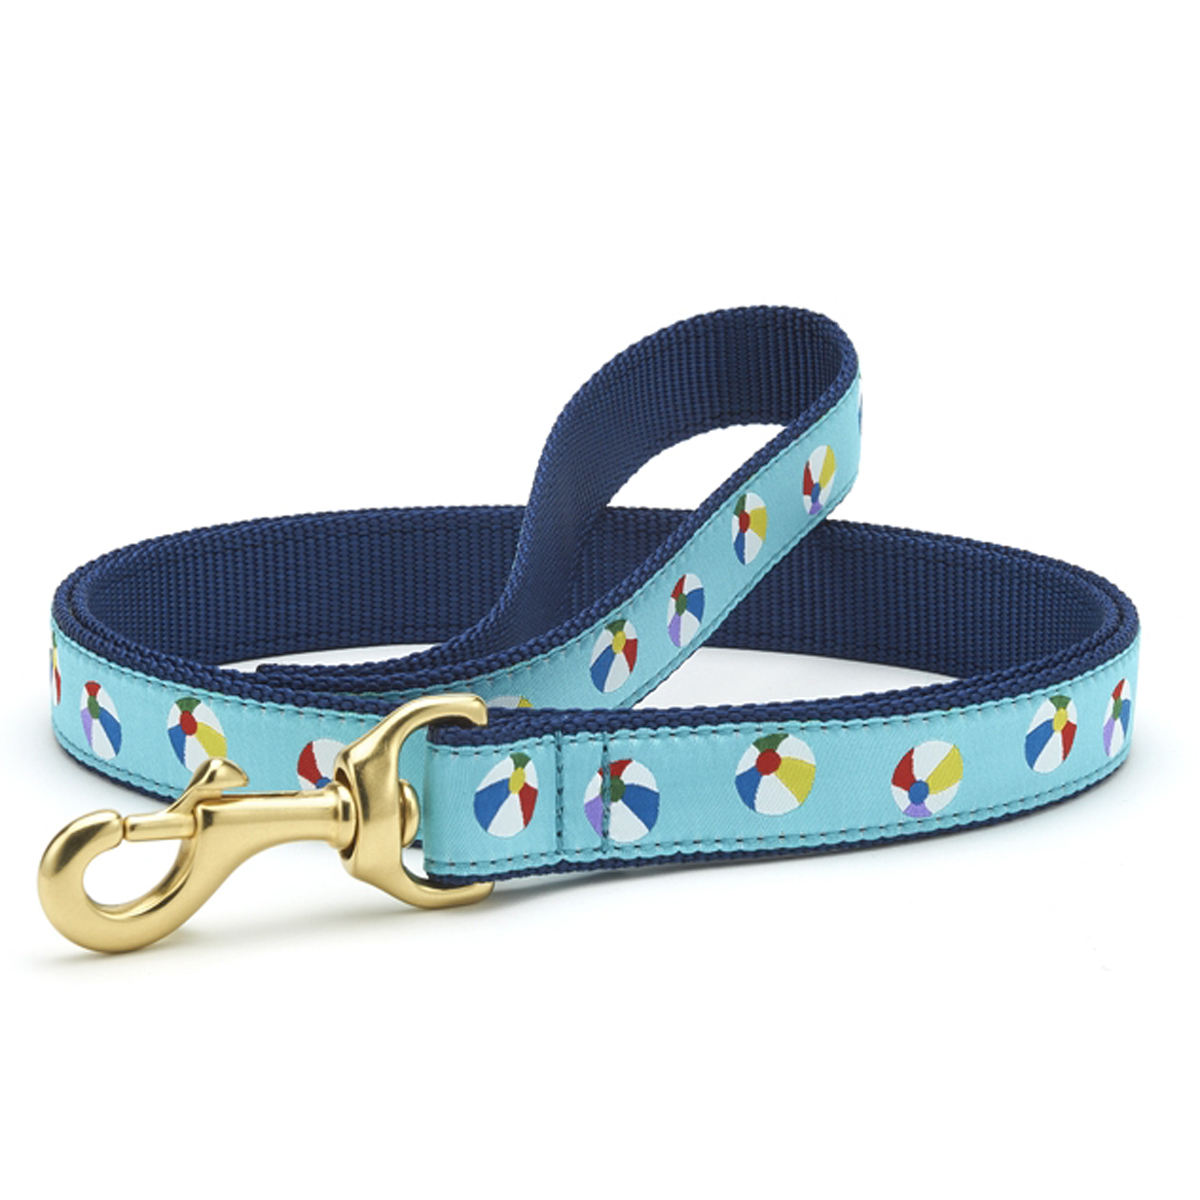 Beach Balls Dog Leash by Up Country